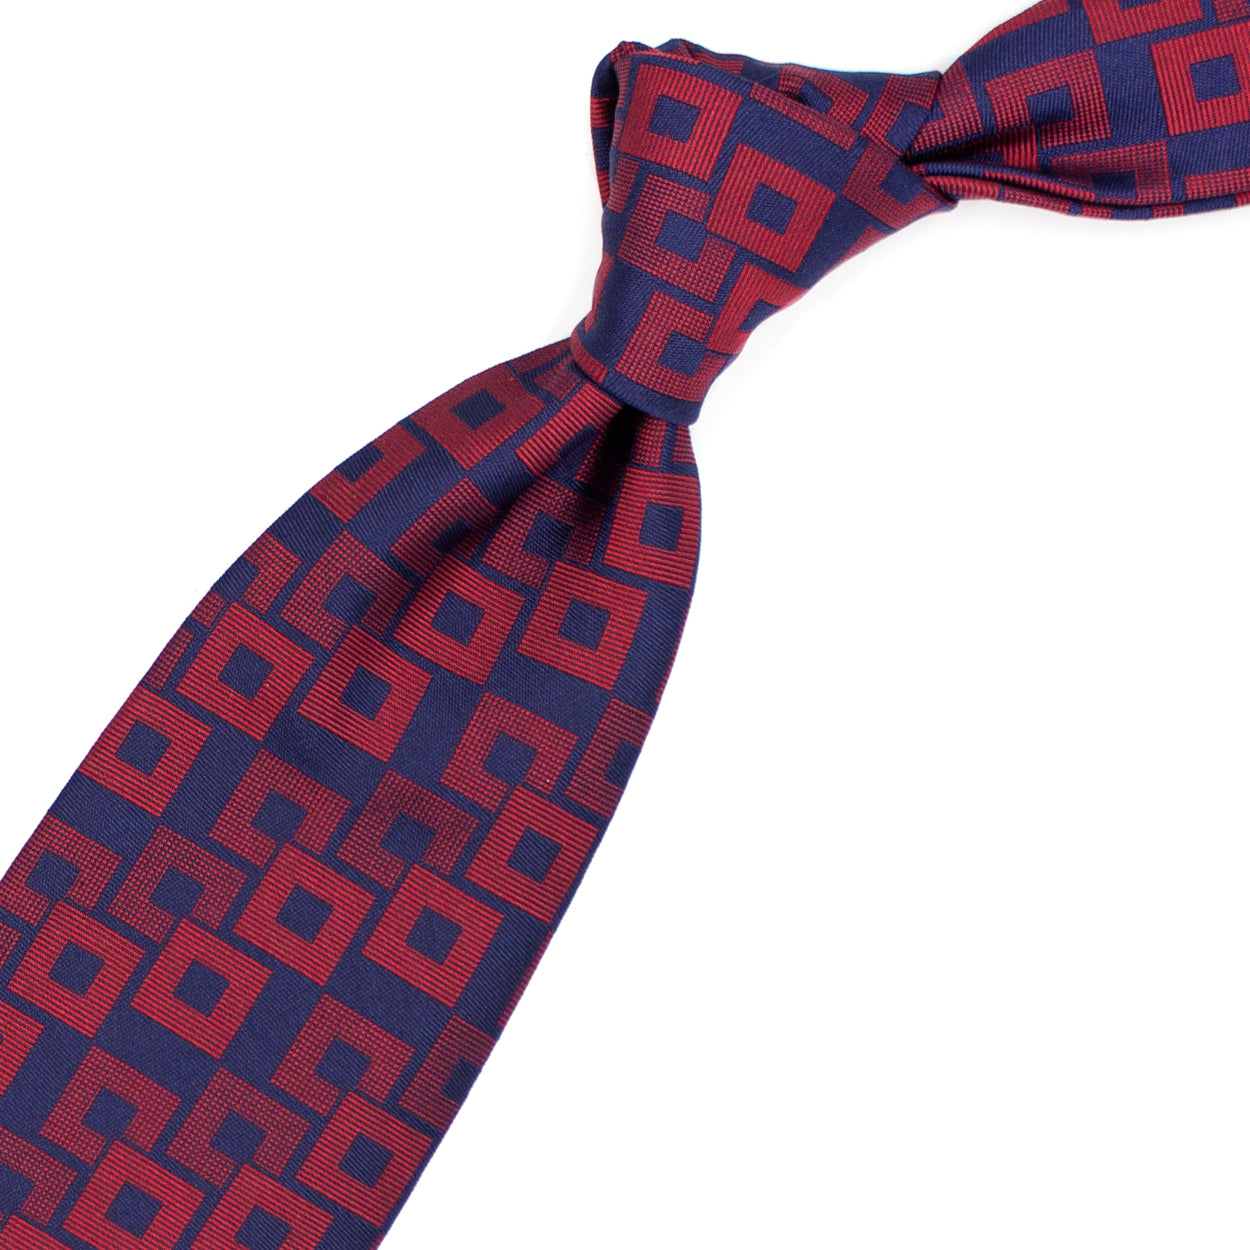 Blue tie with red geometric pattern